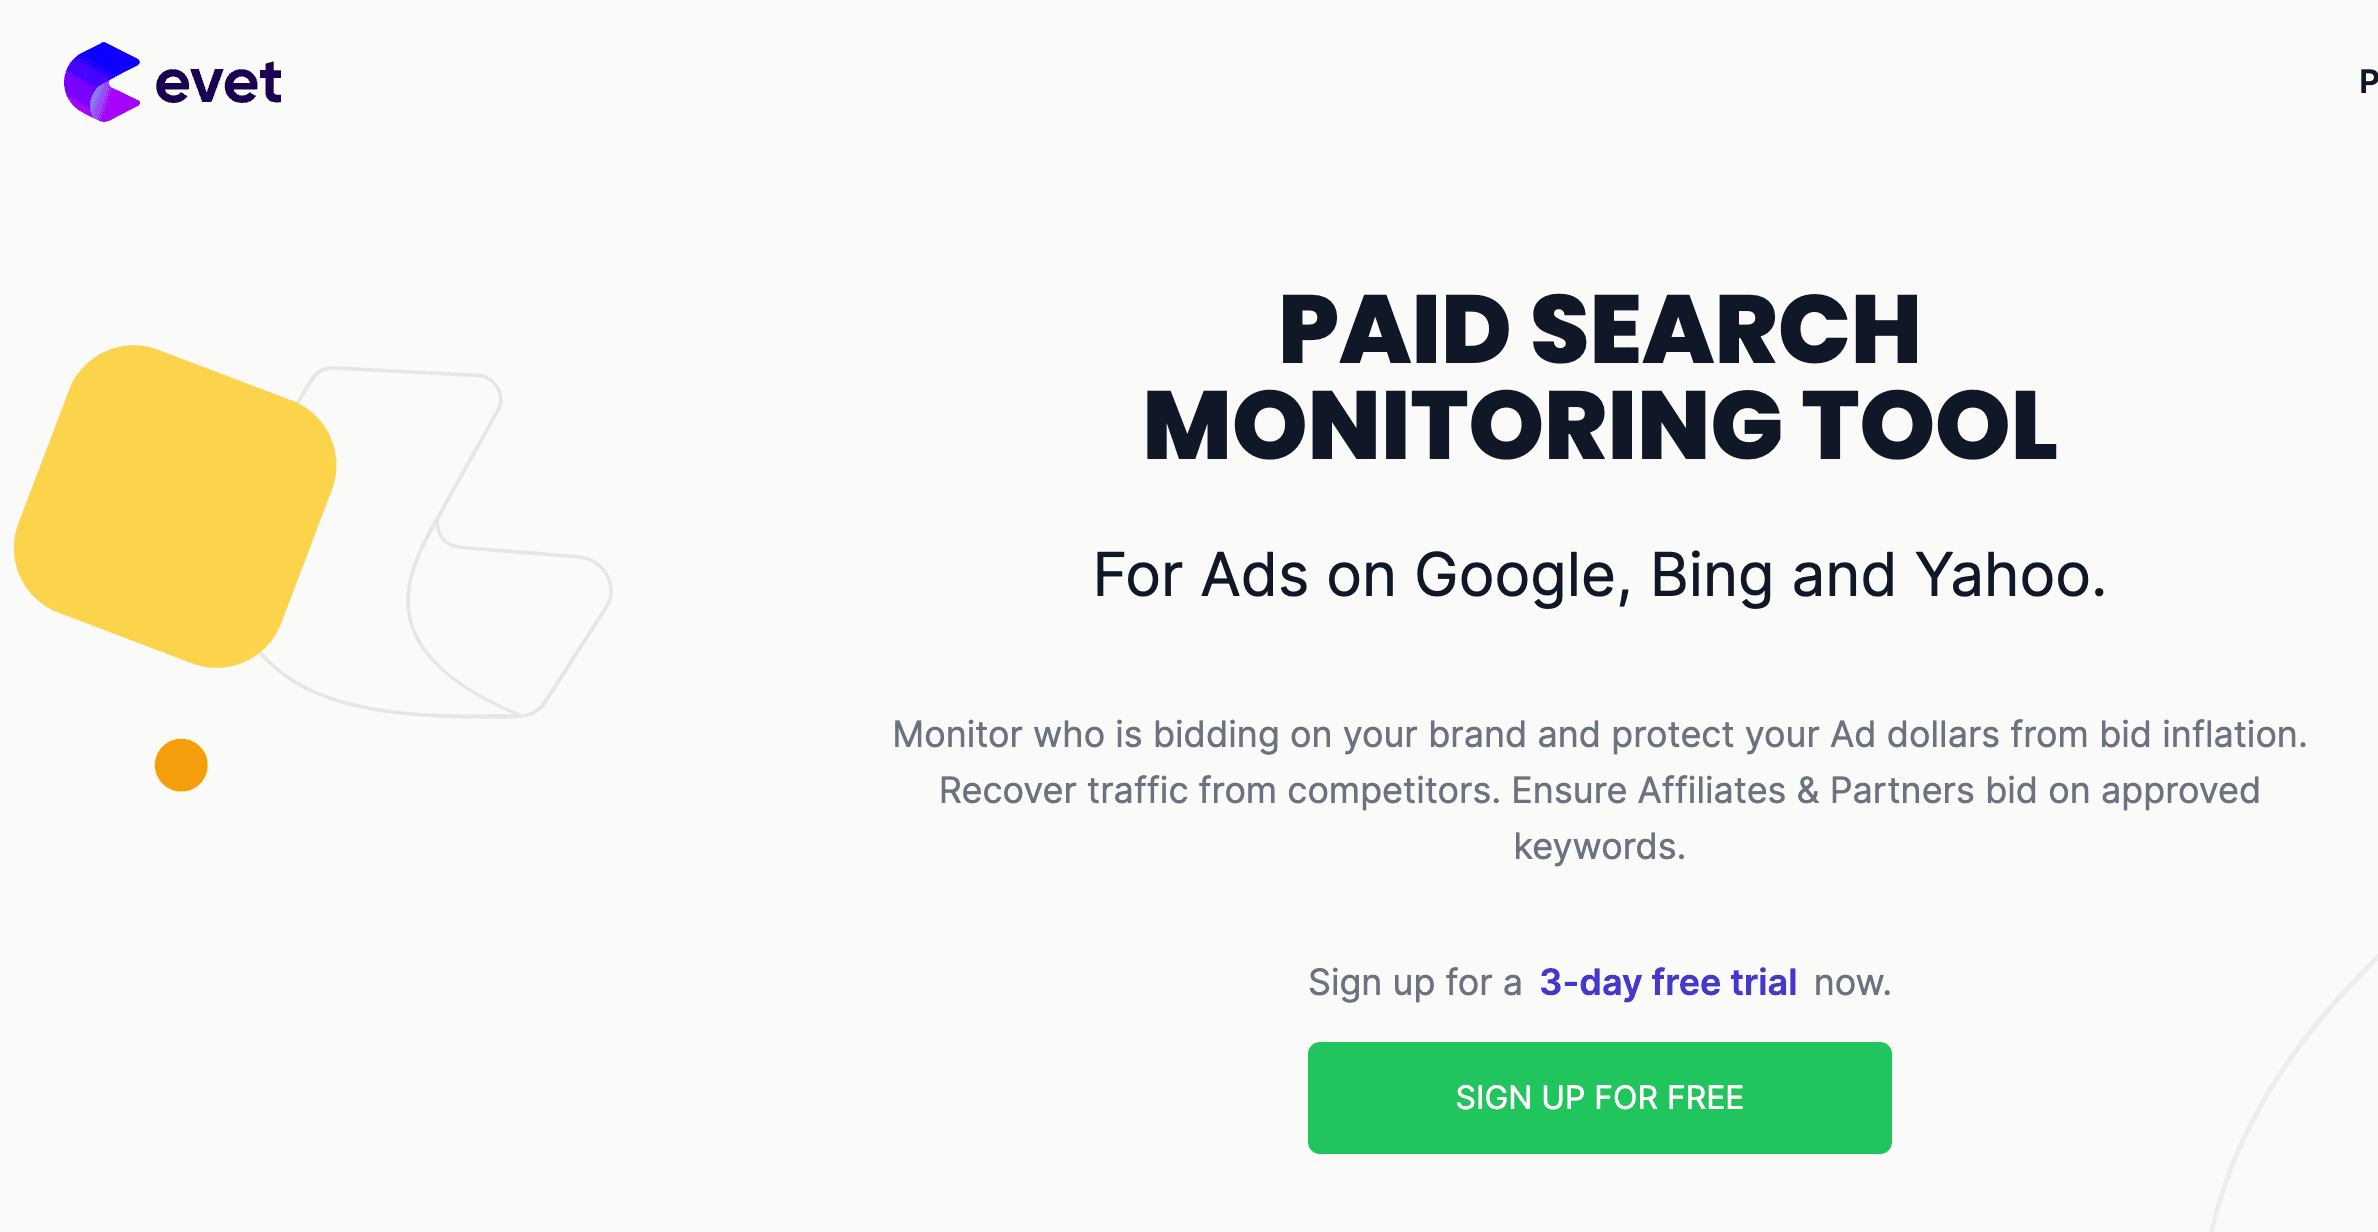 evet paid search monitoring tool